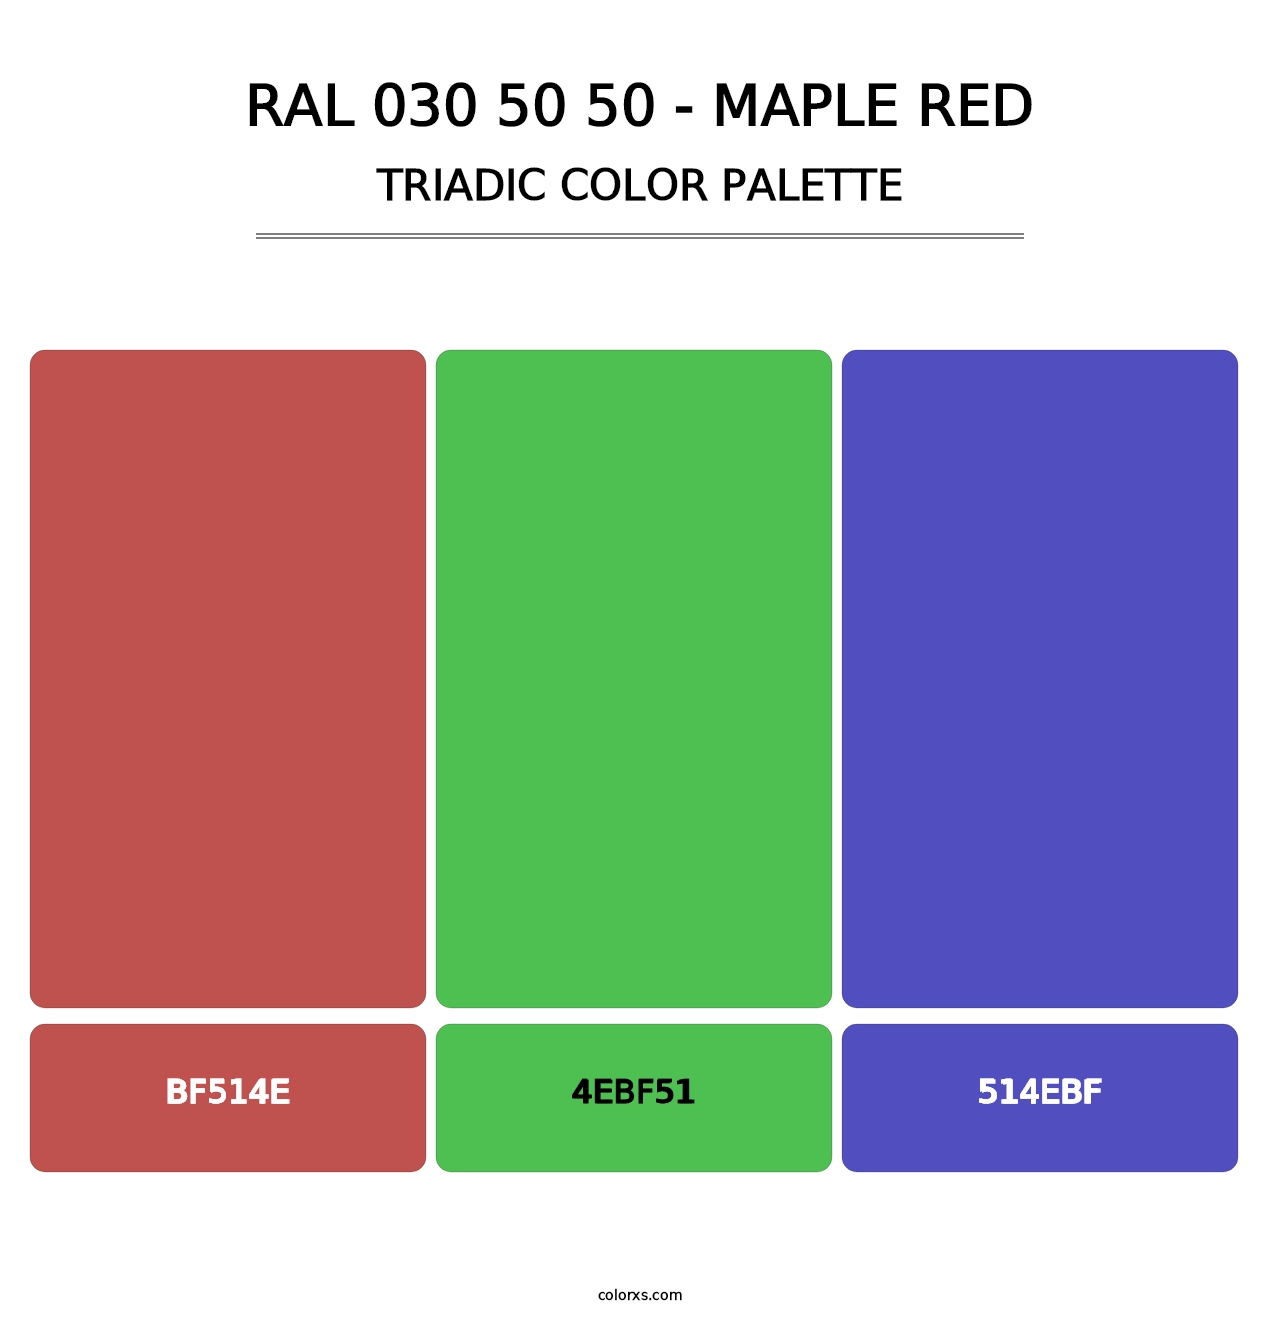 RAL 030 50 50 - Maple Red - Triadic Color Palette